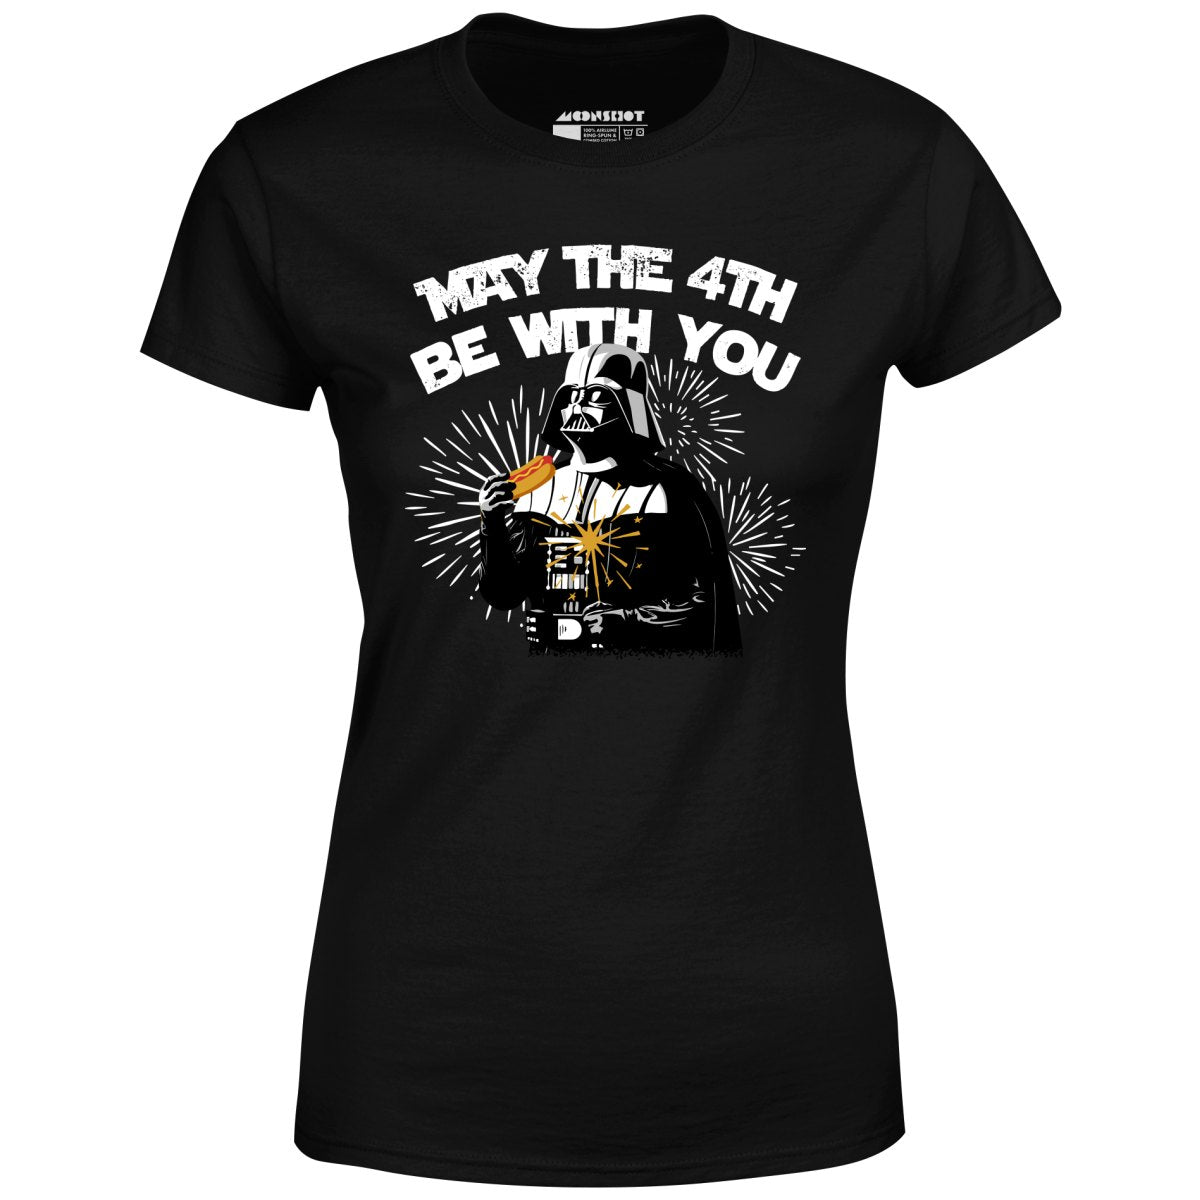 May The 4th Be With You - Women's T-Shirt